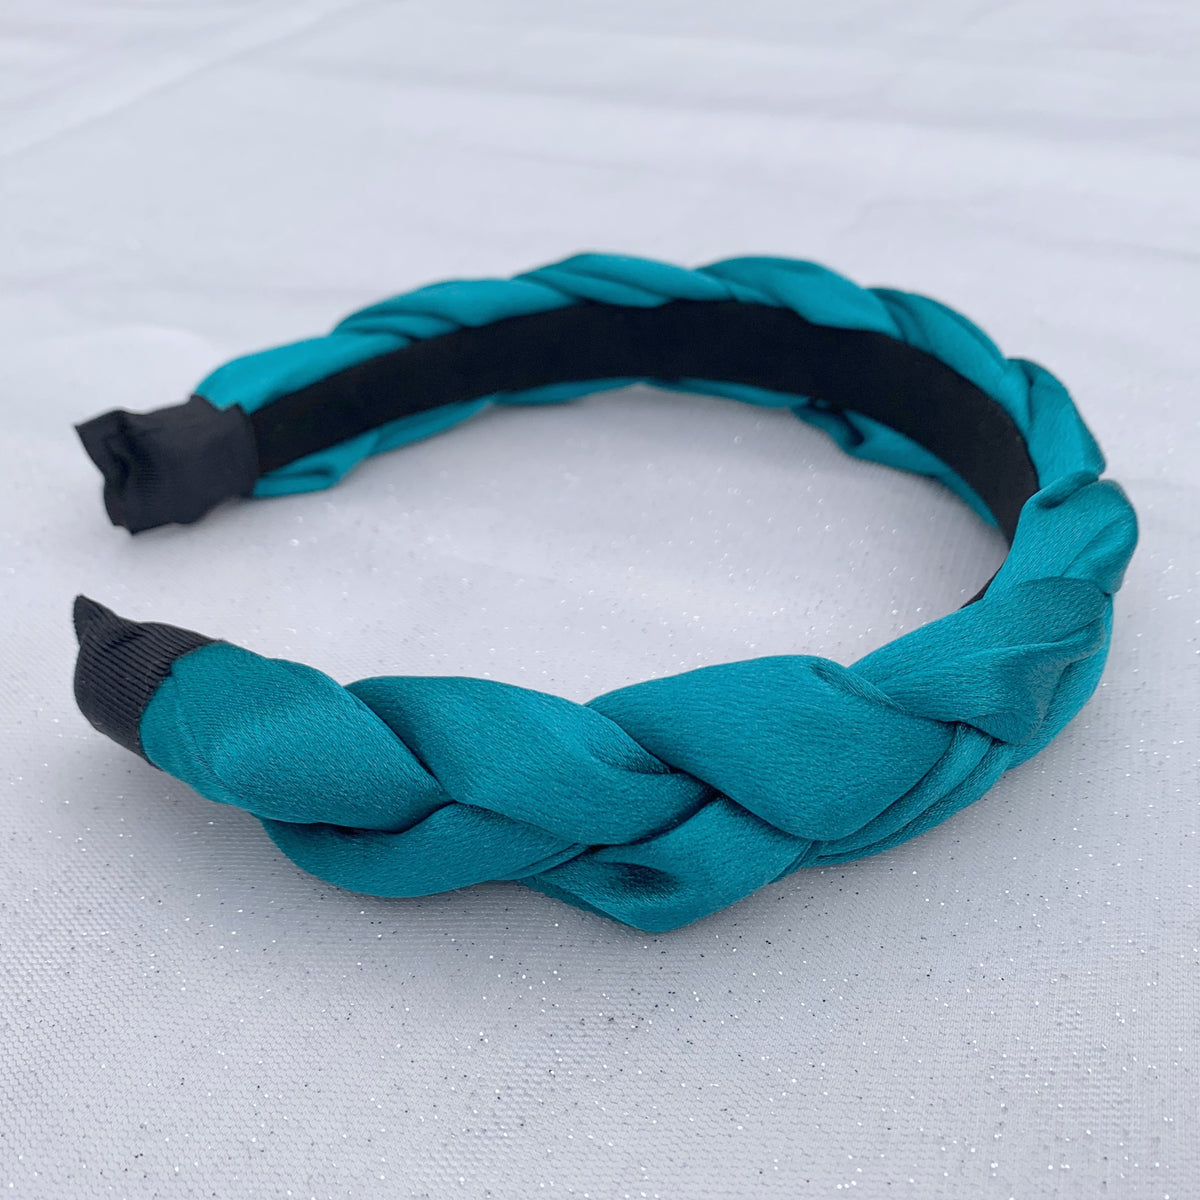 Braided – Turquoise QueenMee Headband Accessories